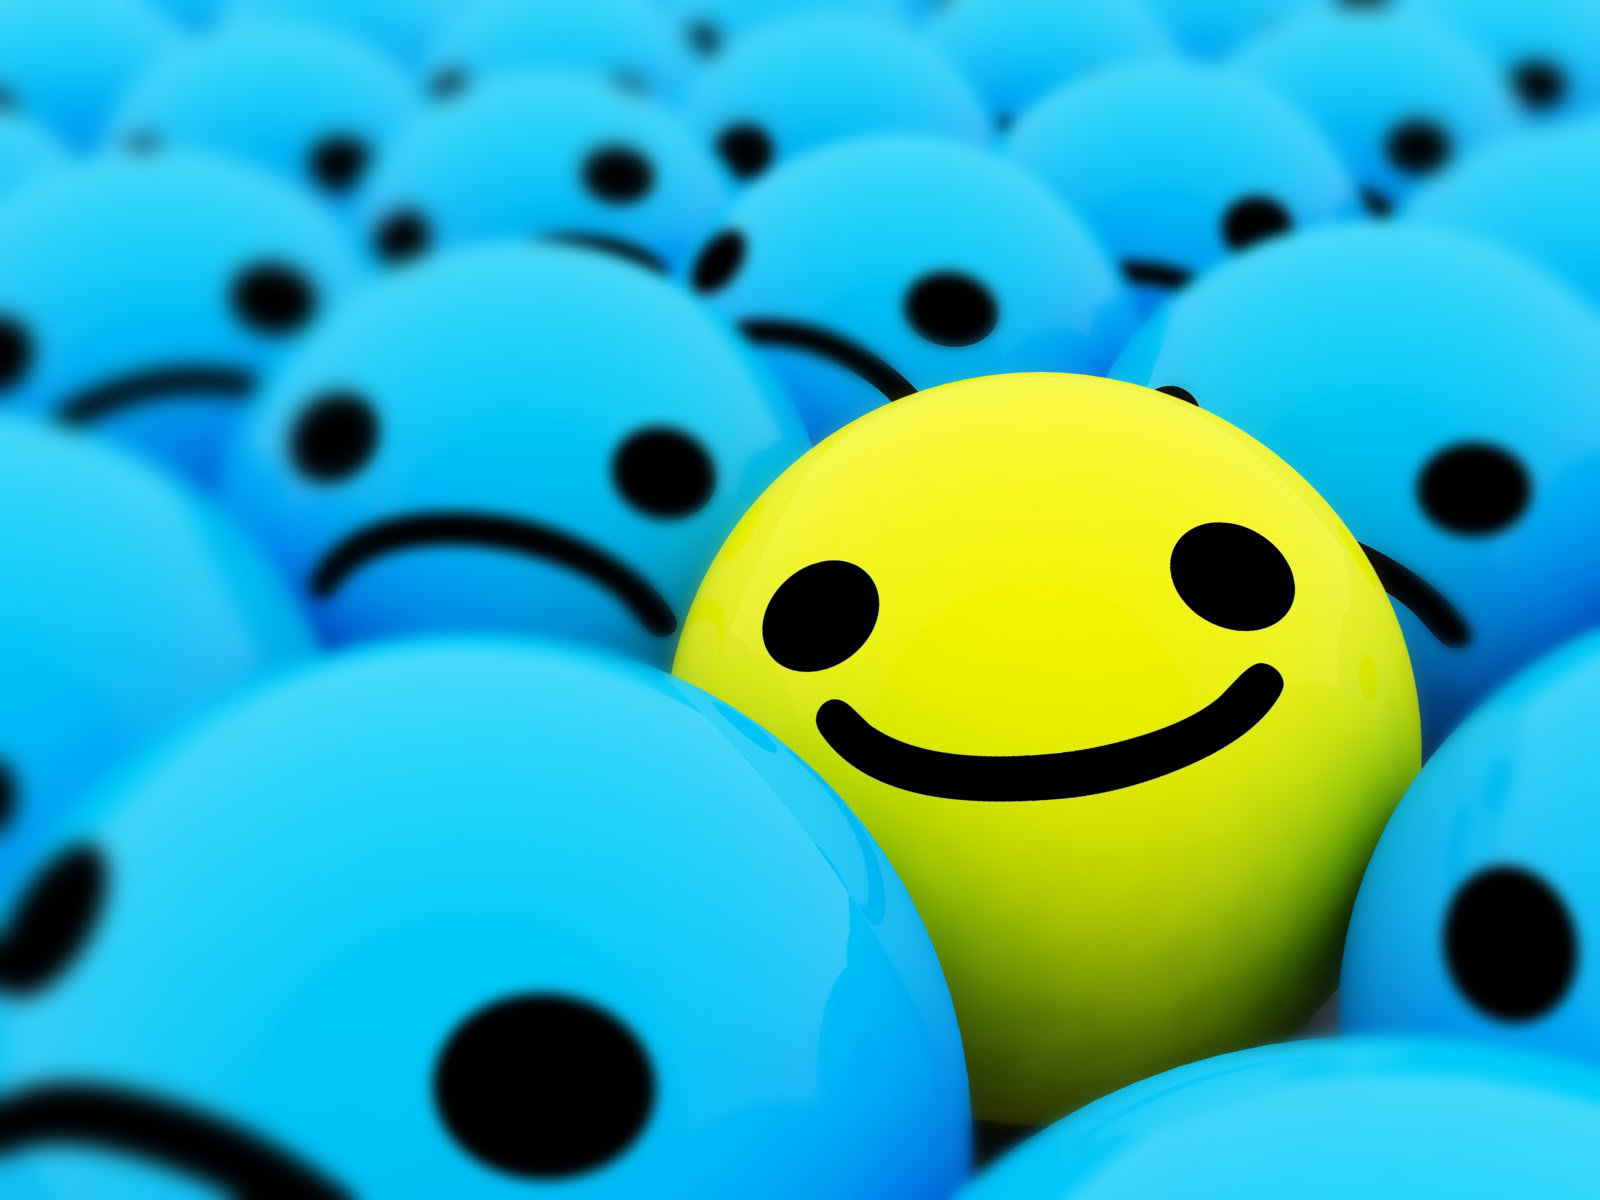 Awesome Smiley Background HD Wallpaper In Others Imageci